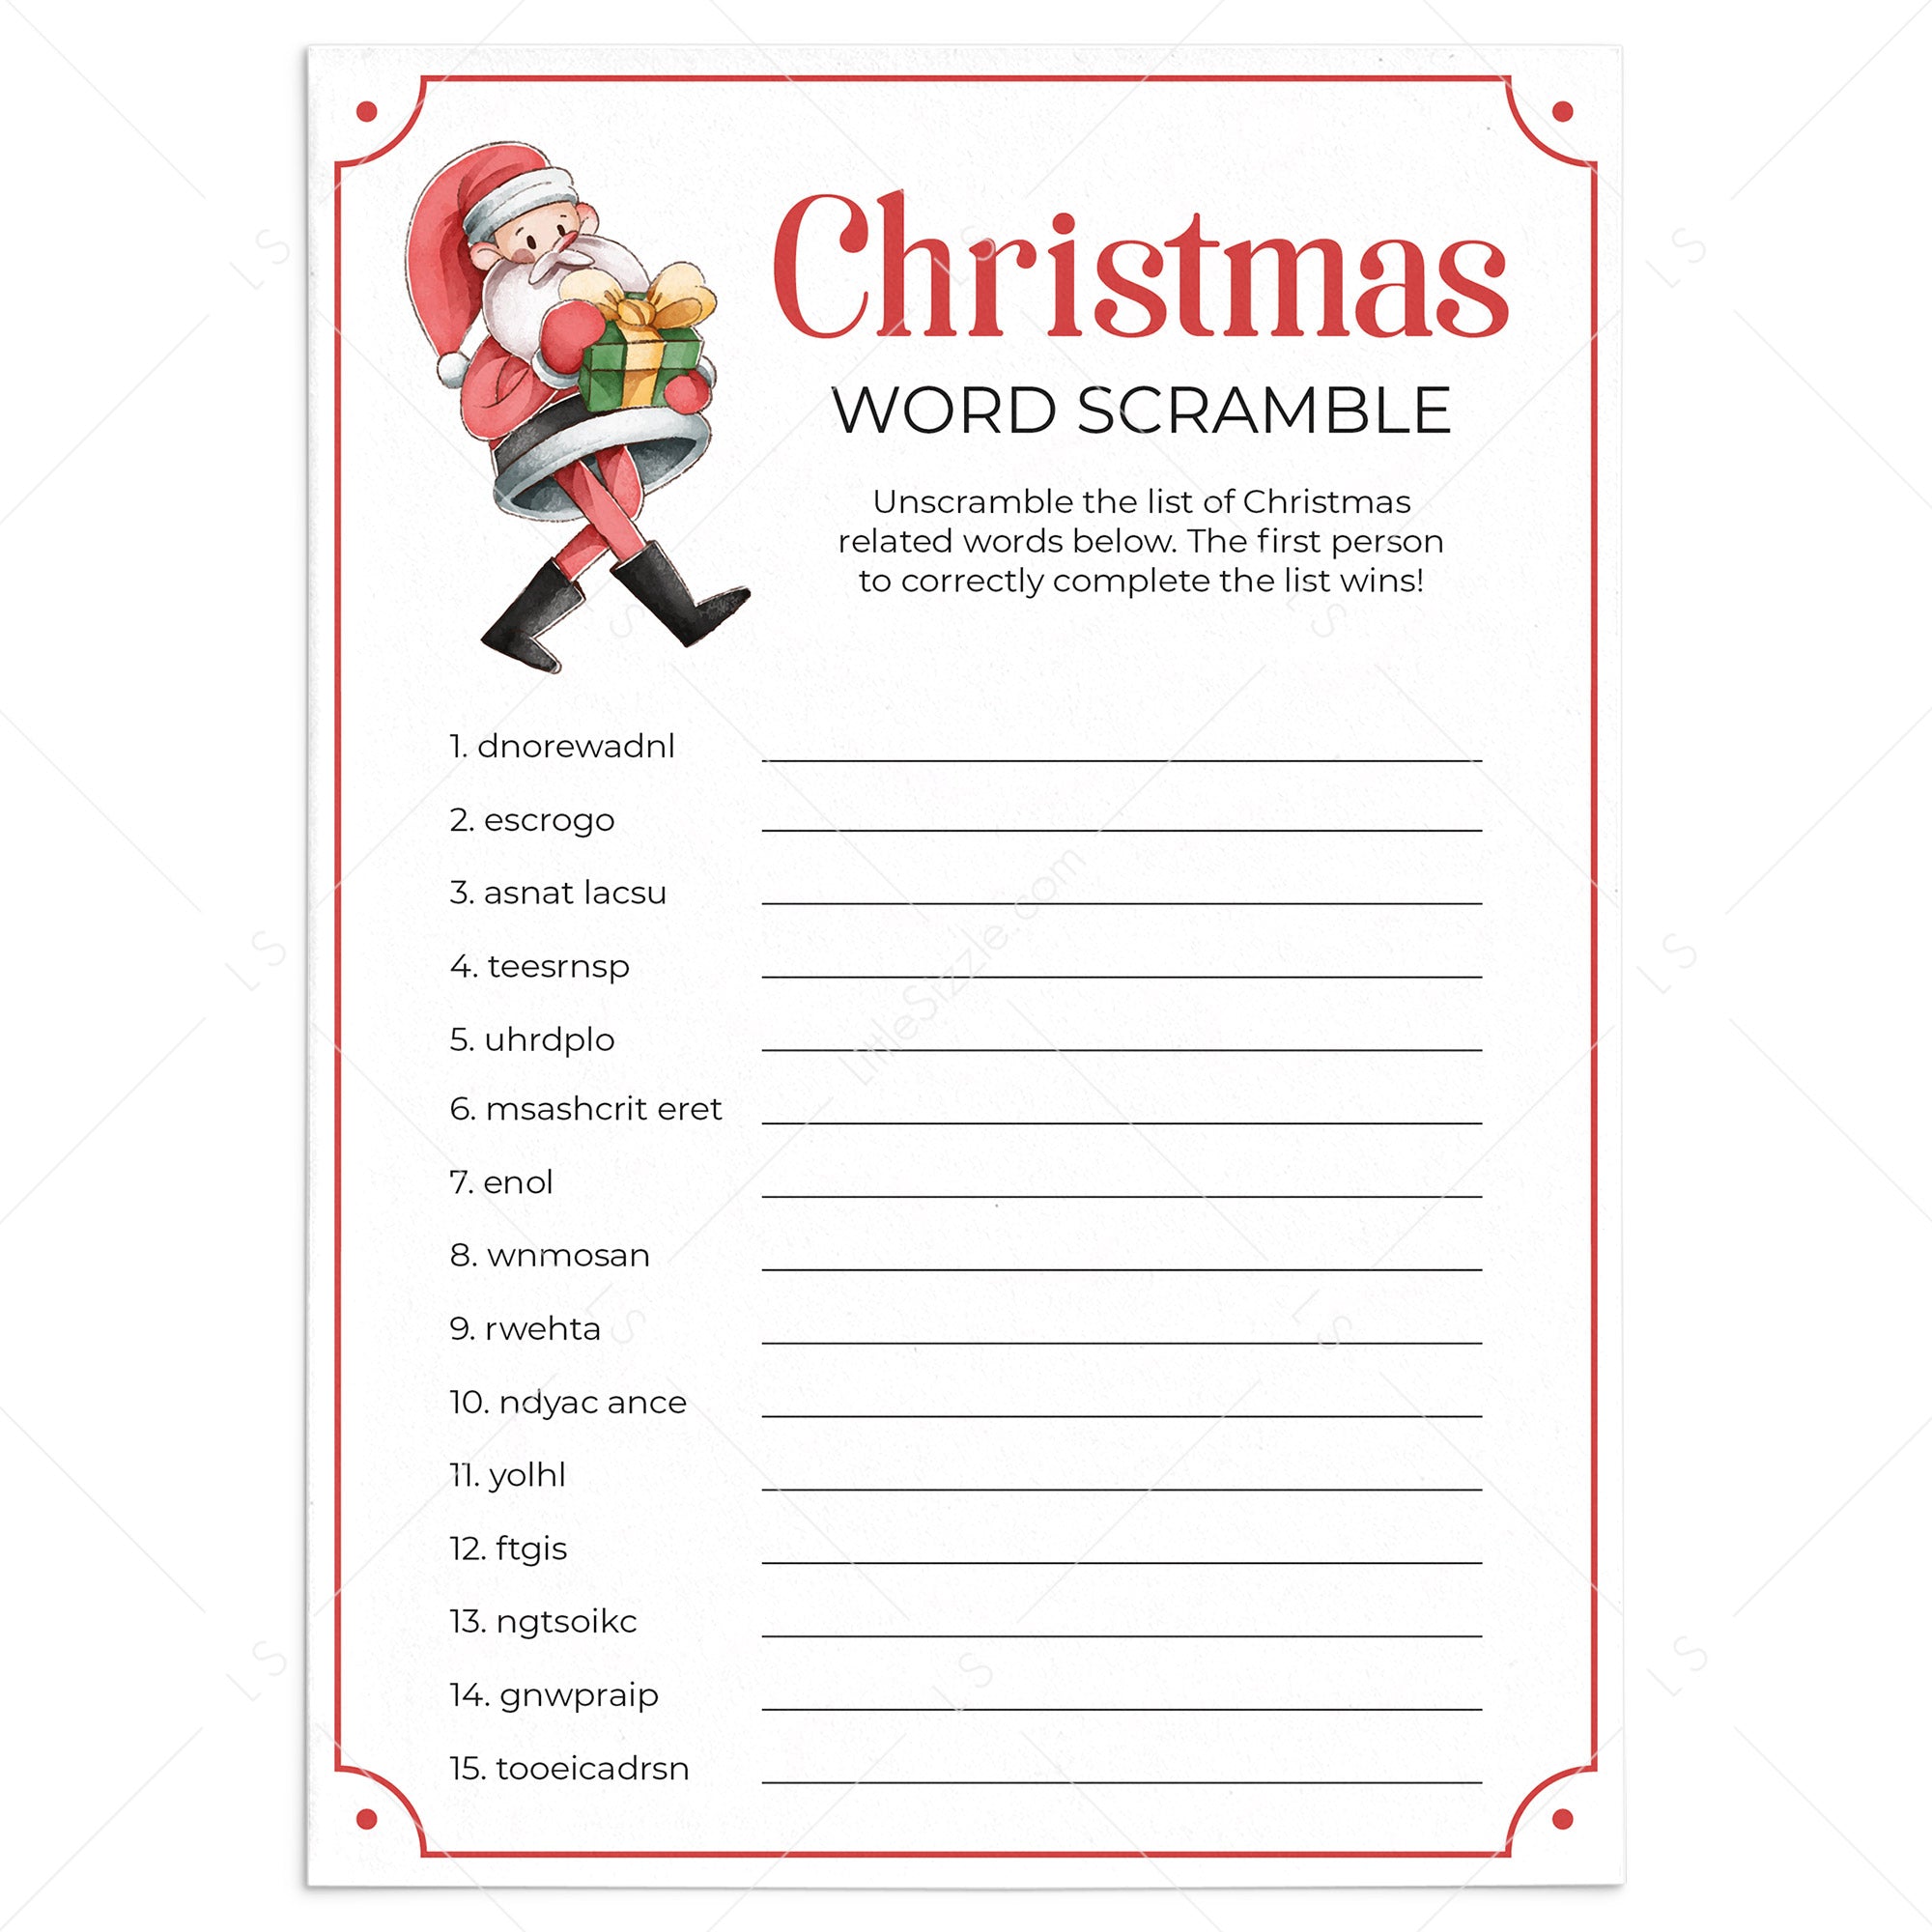 Scrambled Words Christmas Party Game Printable by LittleSizzle